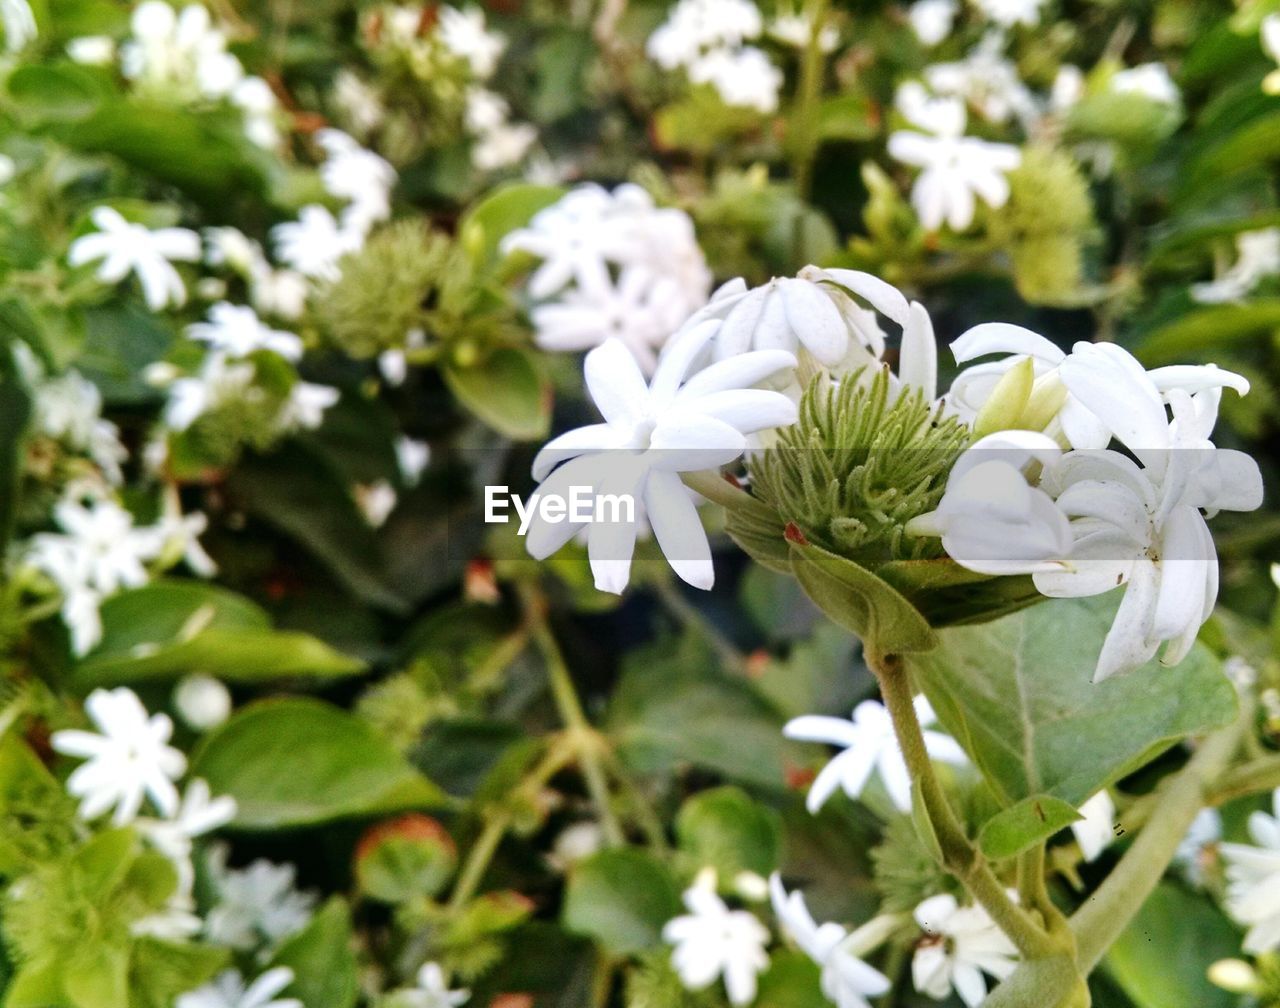 CLOSE-UP OF WHITE FLOWERS BLOOMING ON PLANT